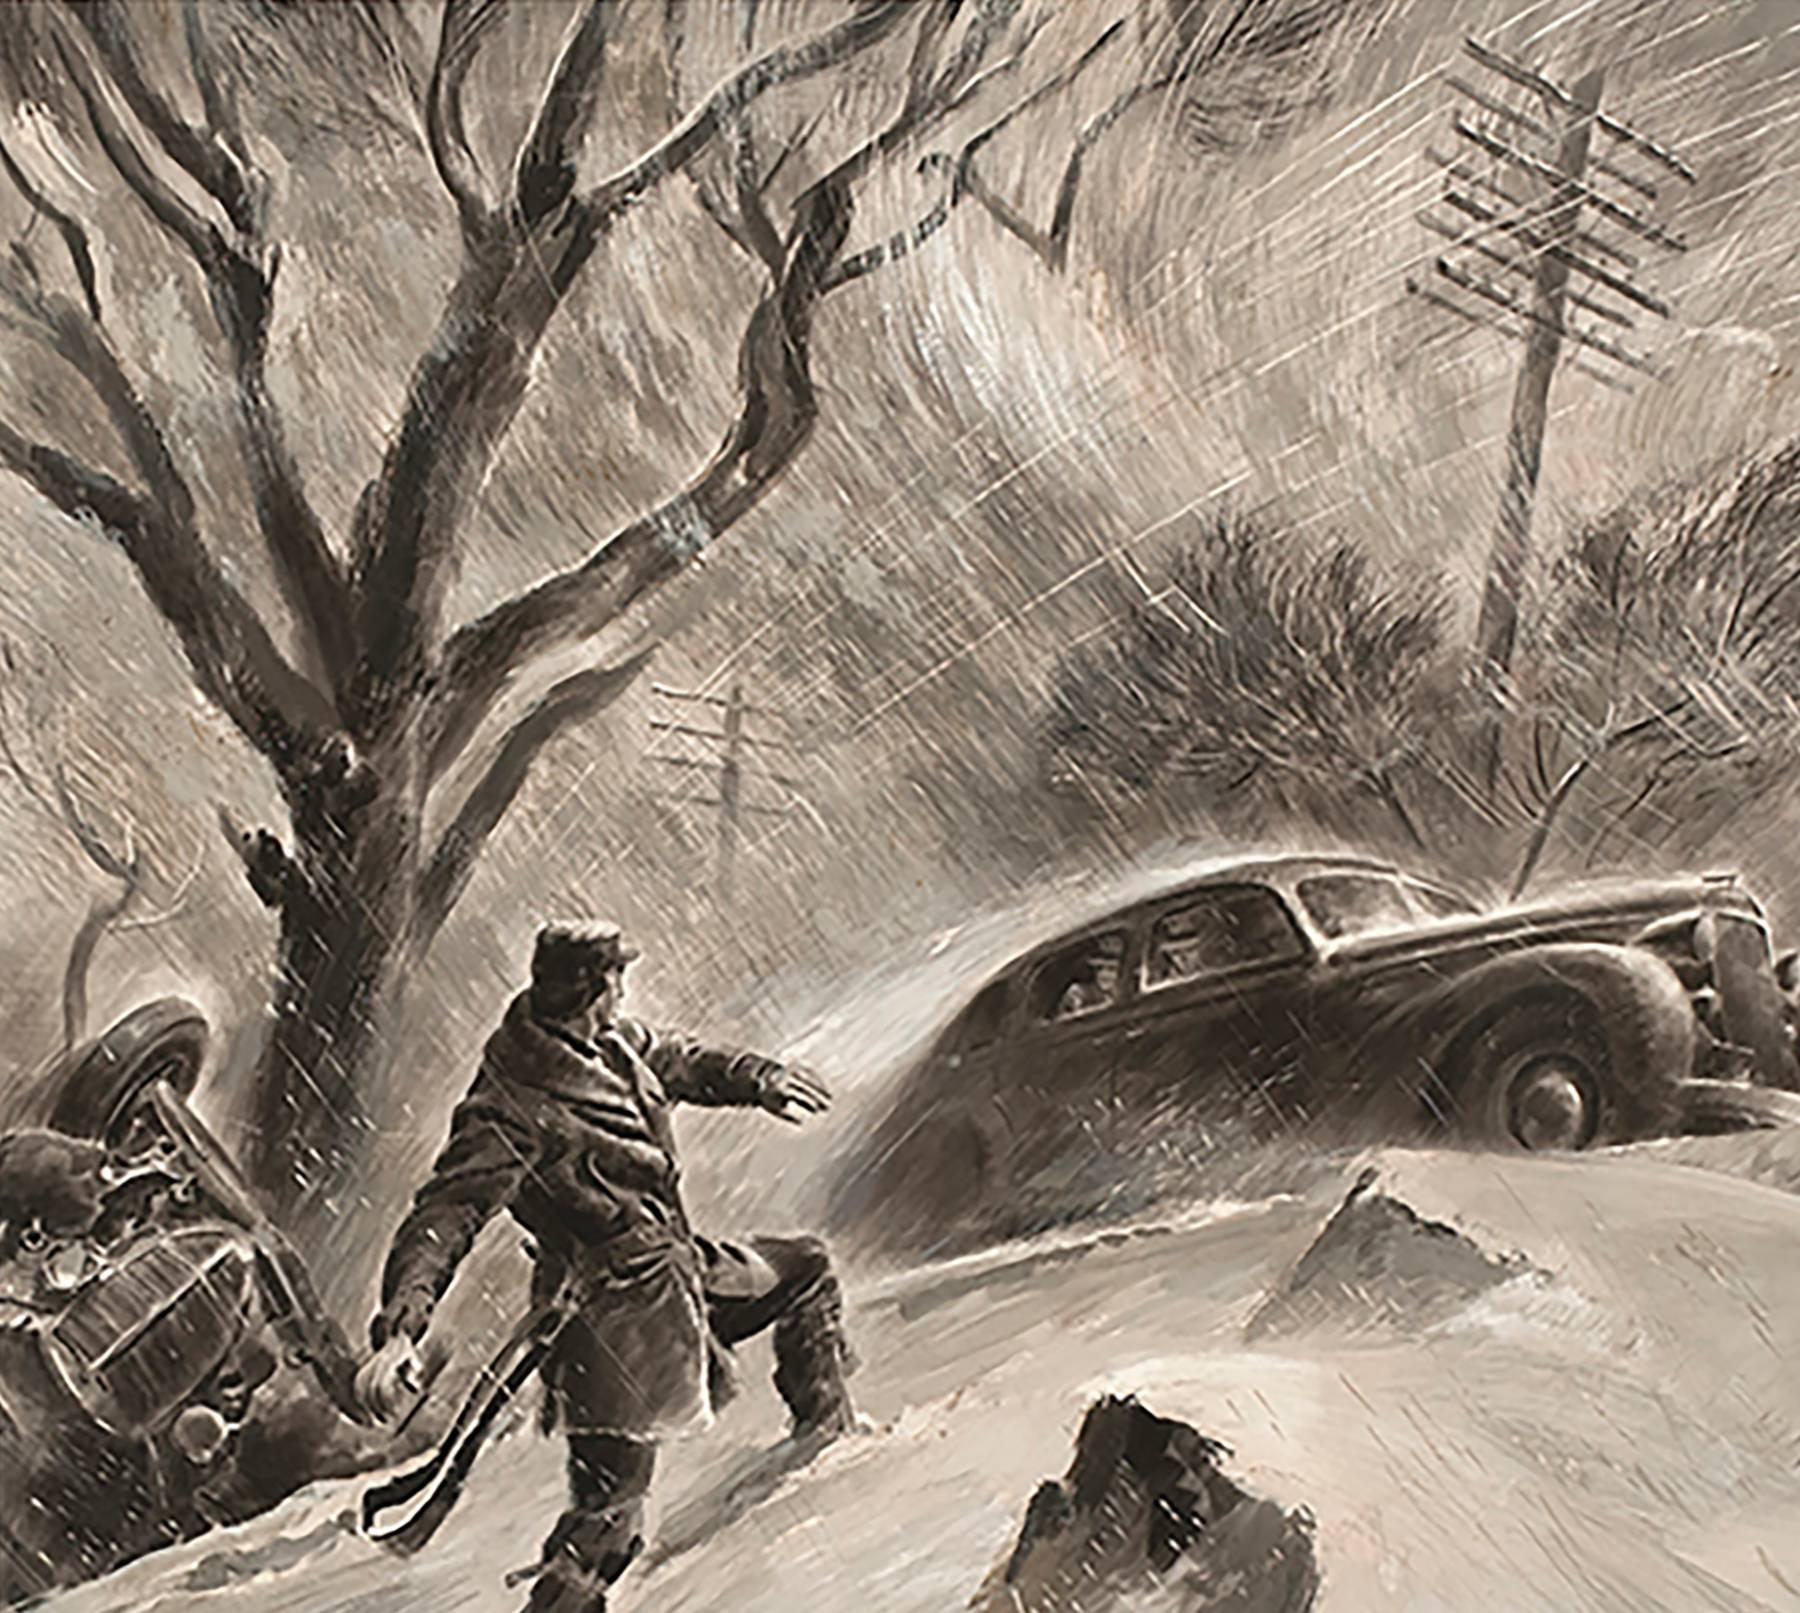 "There's Two Kinds of Heroes" Story Illustration, Saturday Evening Post